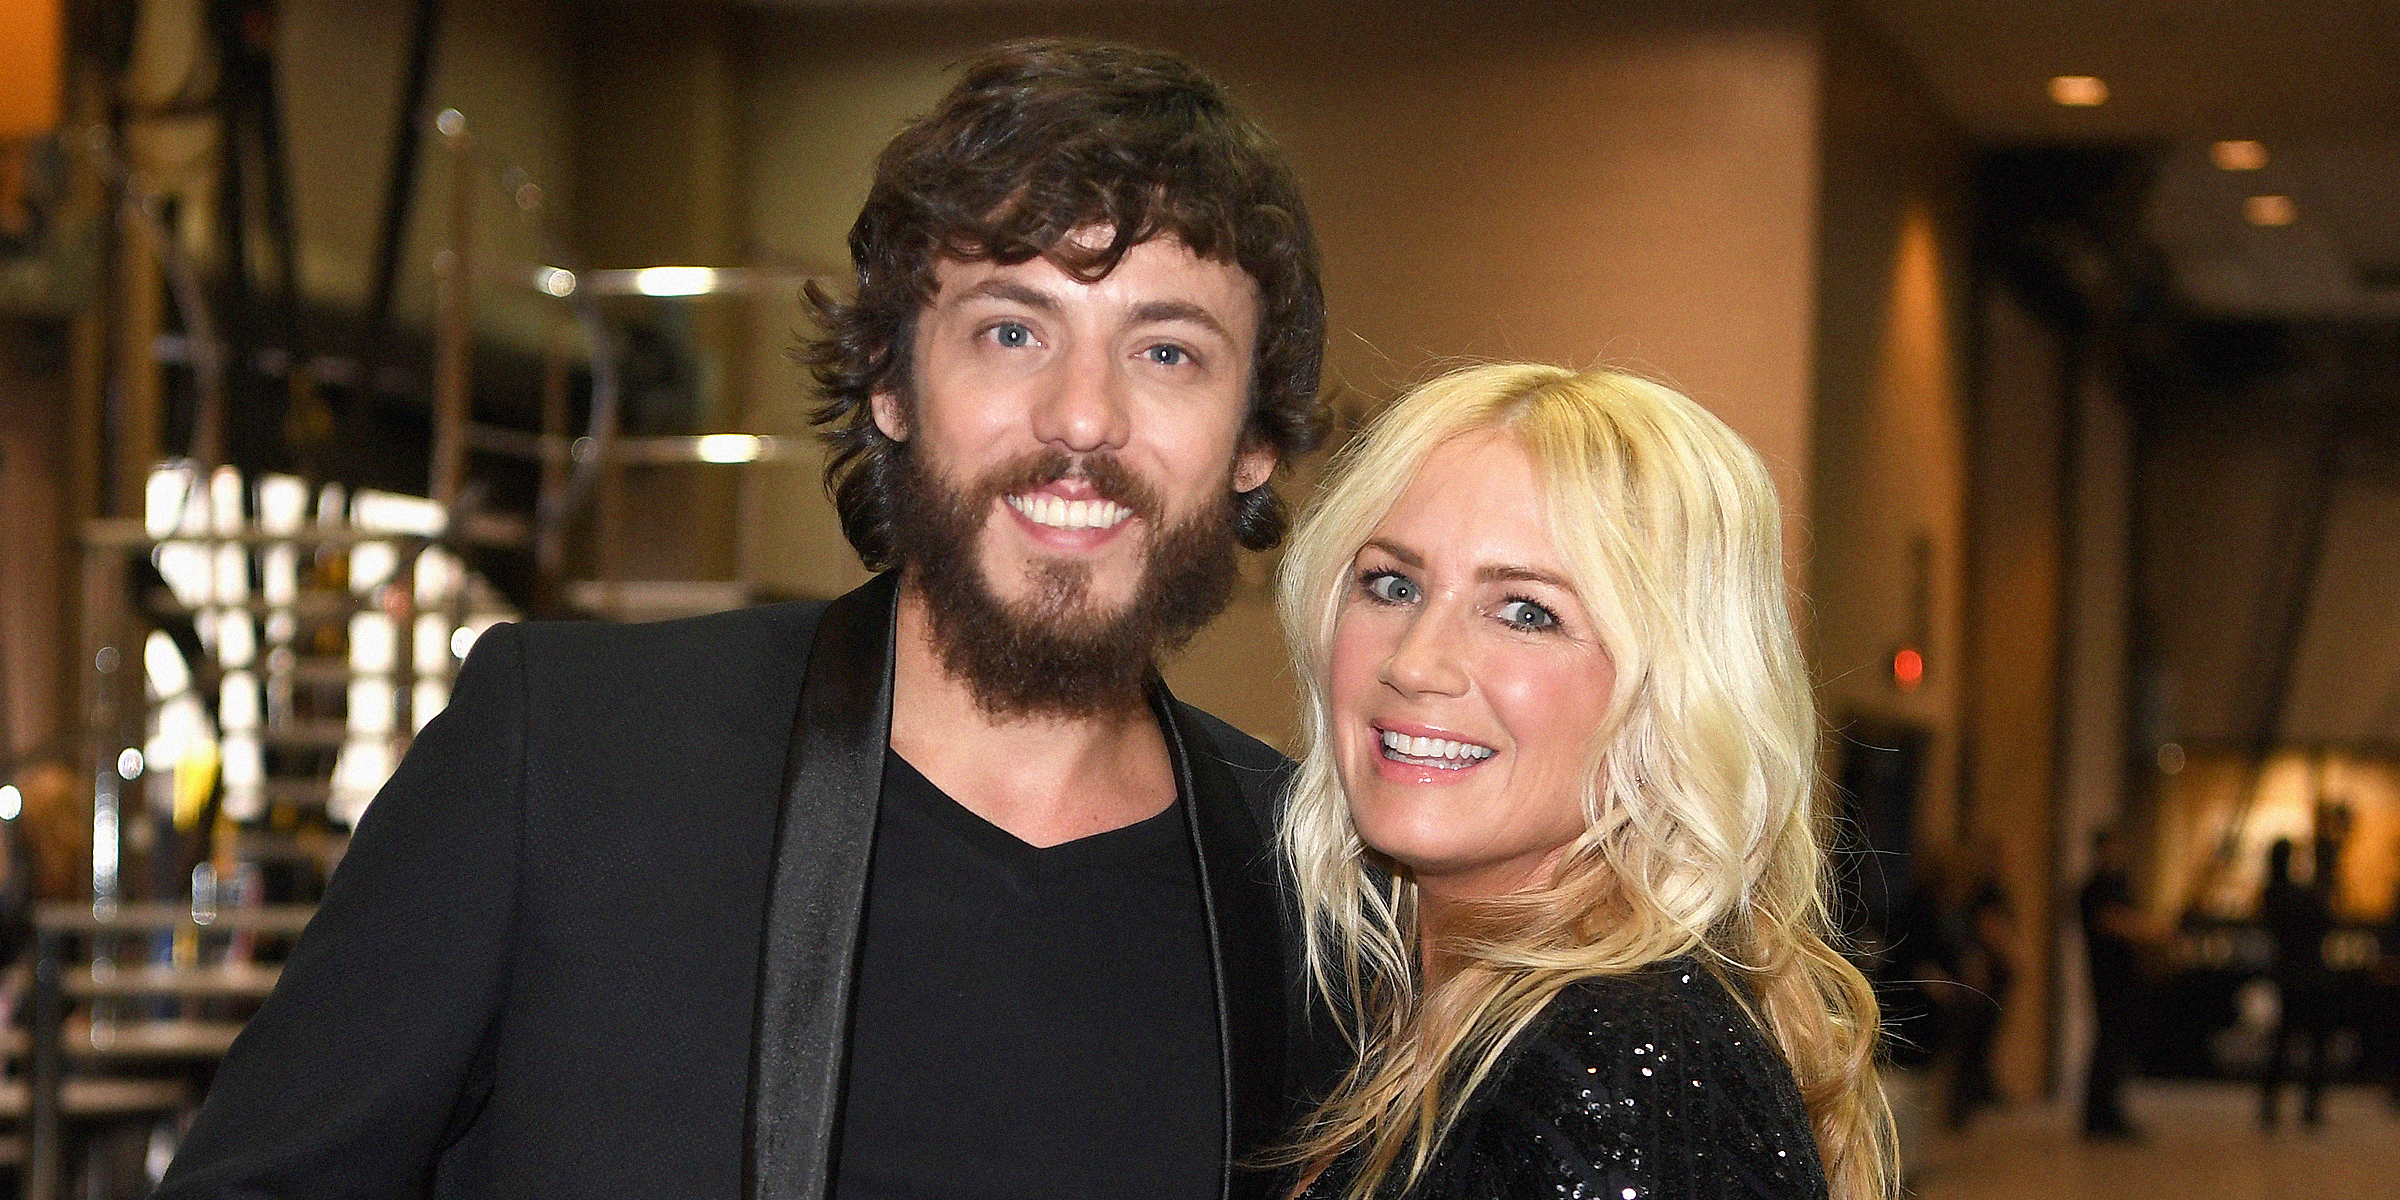 Chris Janson and Kelly Lynn. | Source: Getty Images